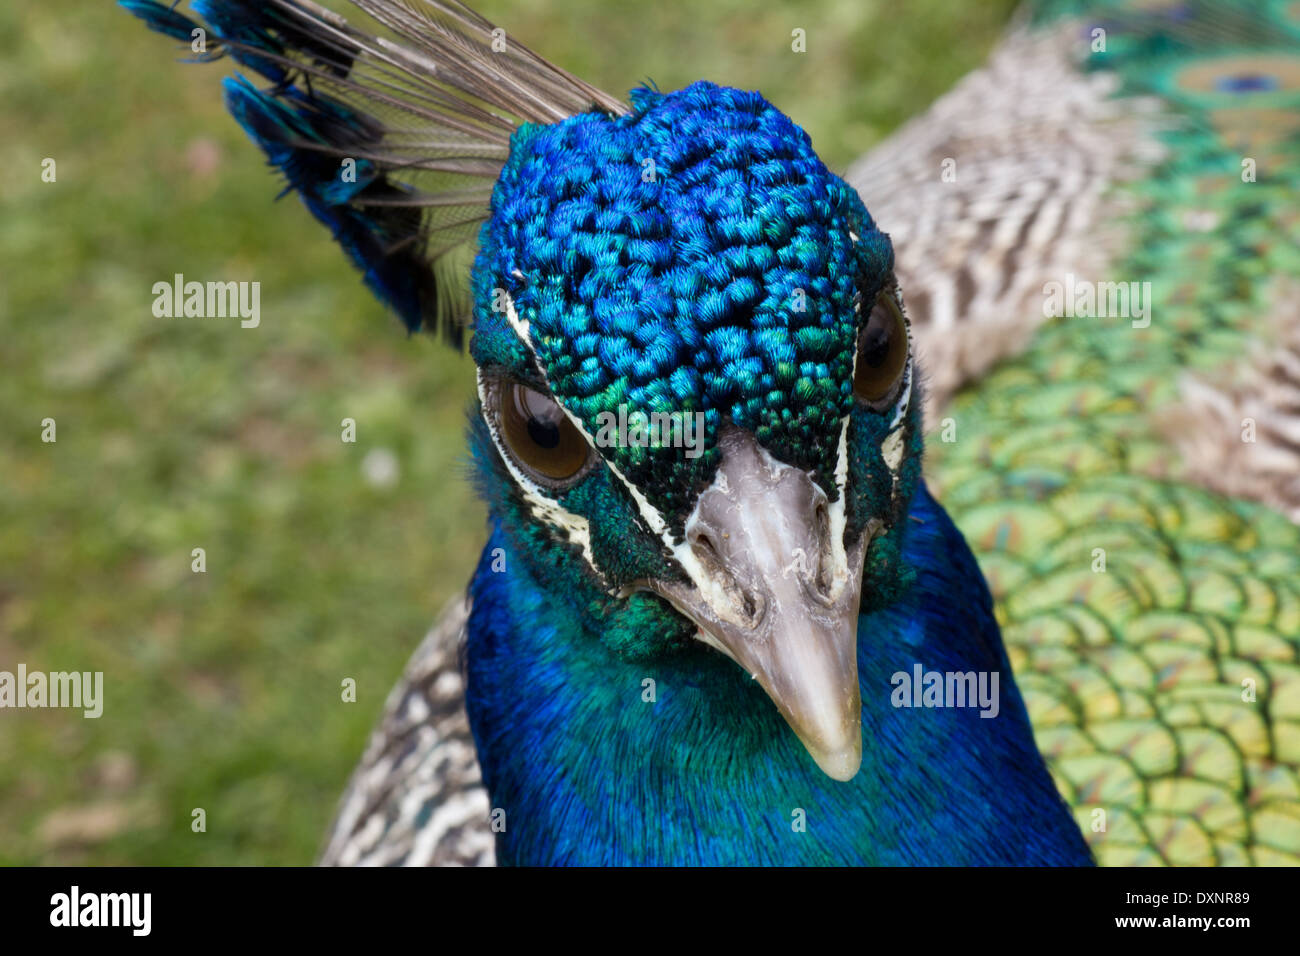 Macro shot of peacocks head in colorful iridescent detail Stock Photo